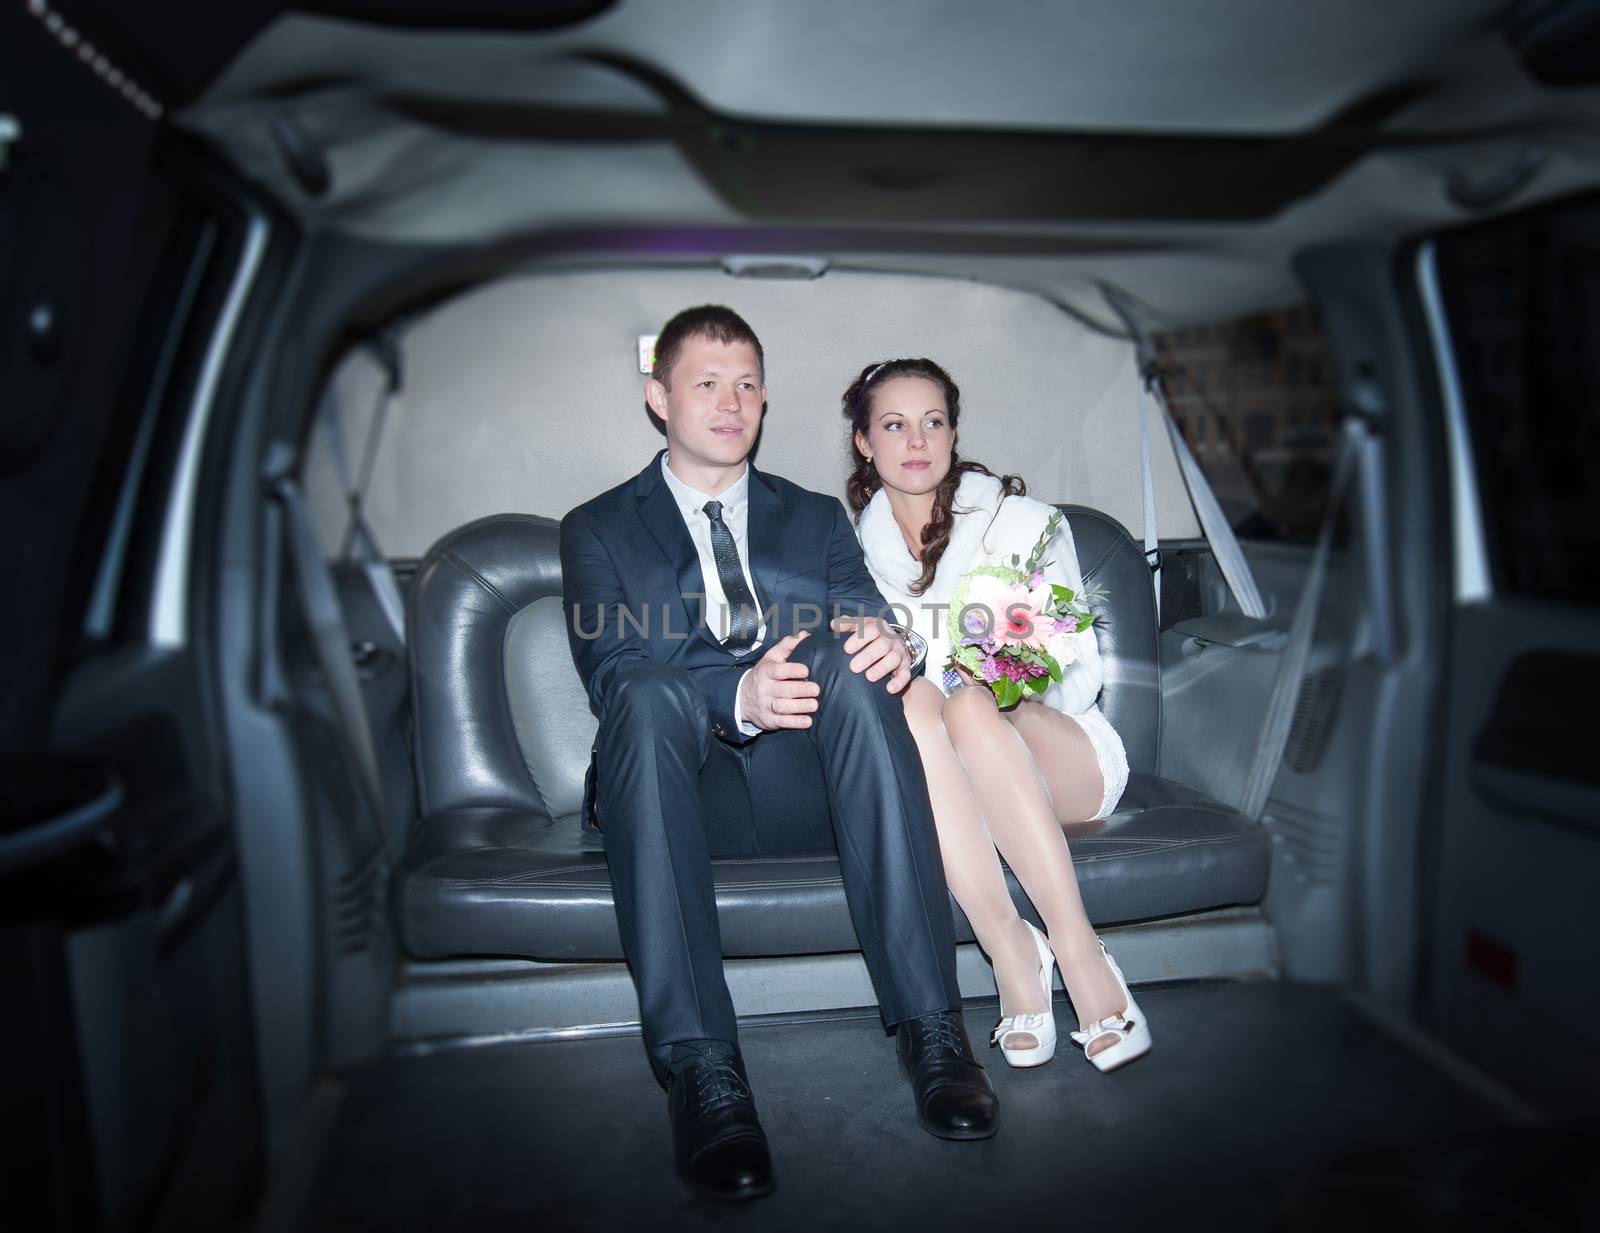 Newlyweds in the limousine  by raduga21